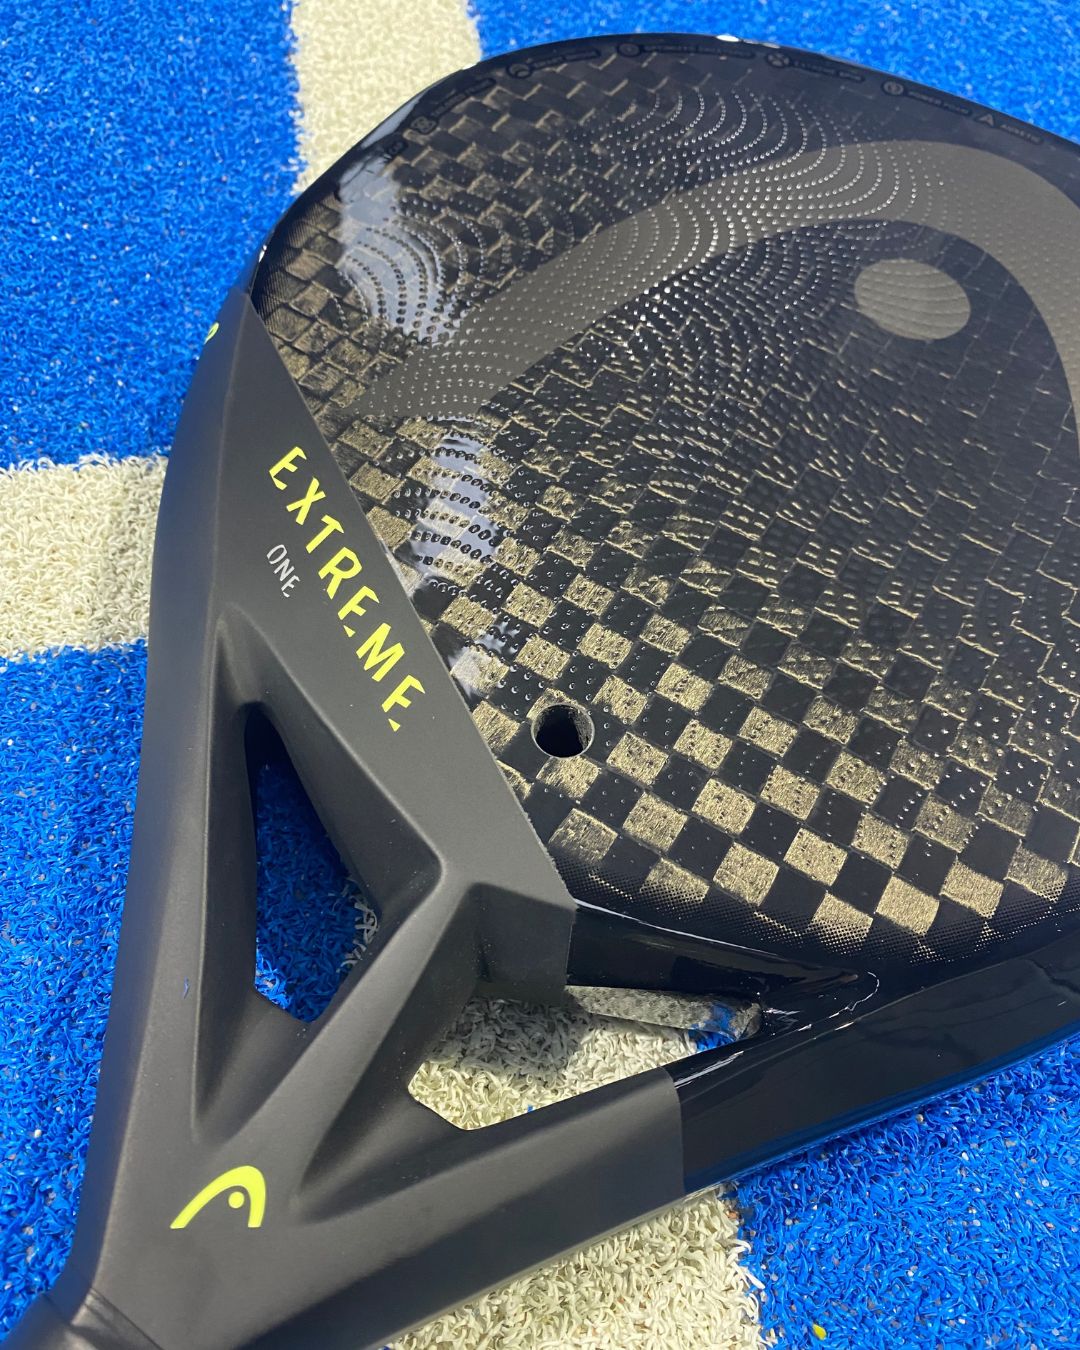 EXTREME ONE has a distinct appearance compared to conventional racquets in having only one drilled hole in the hitting surface